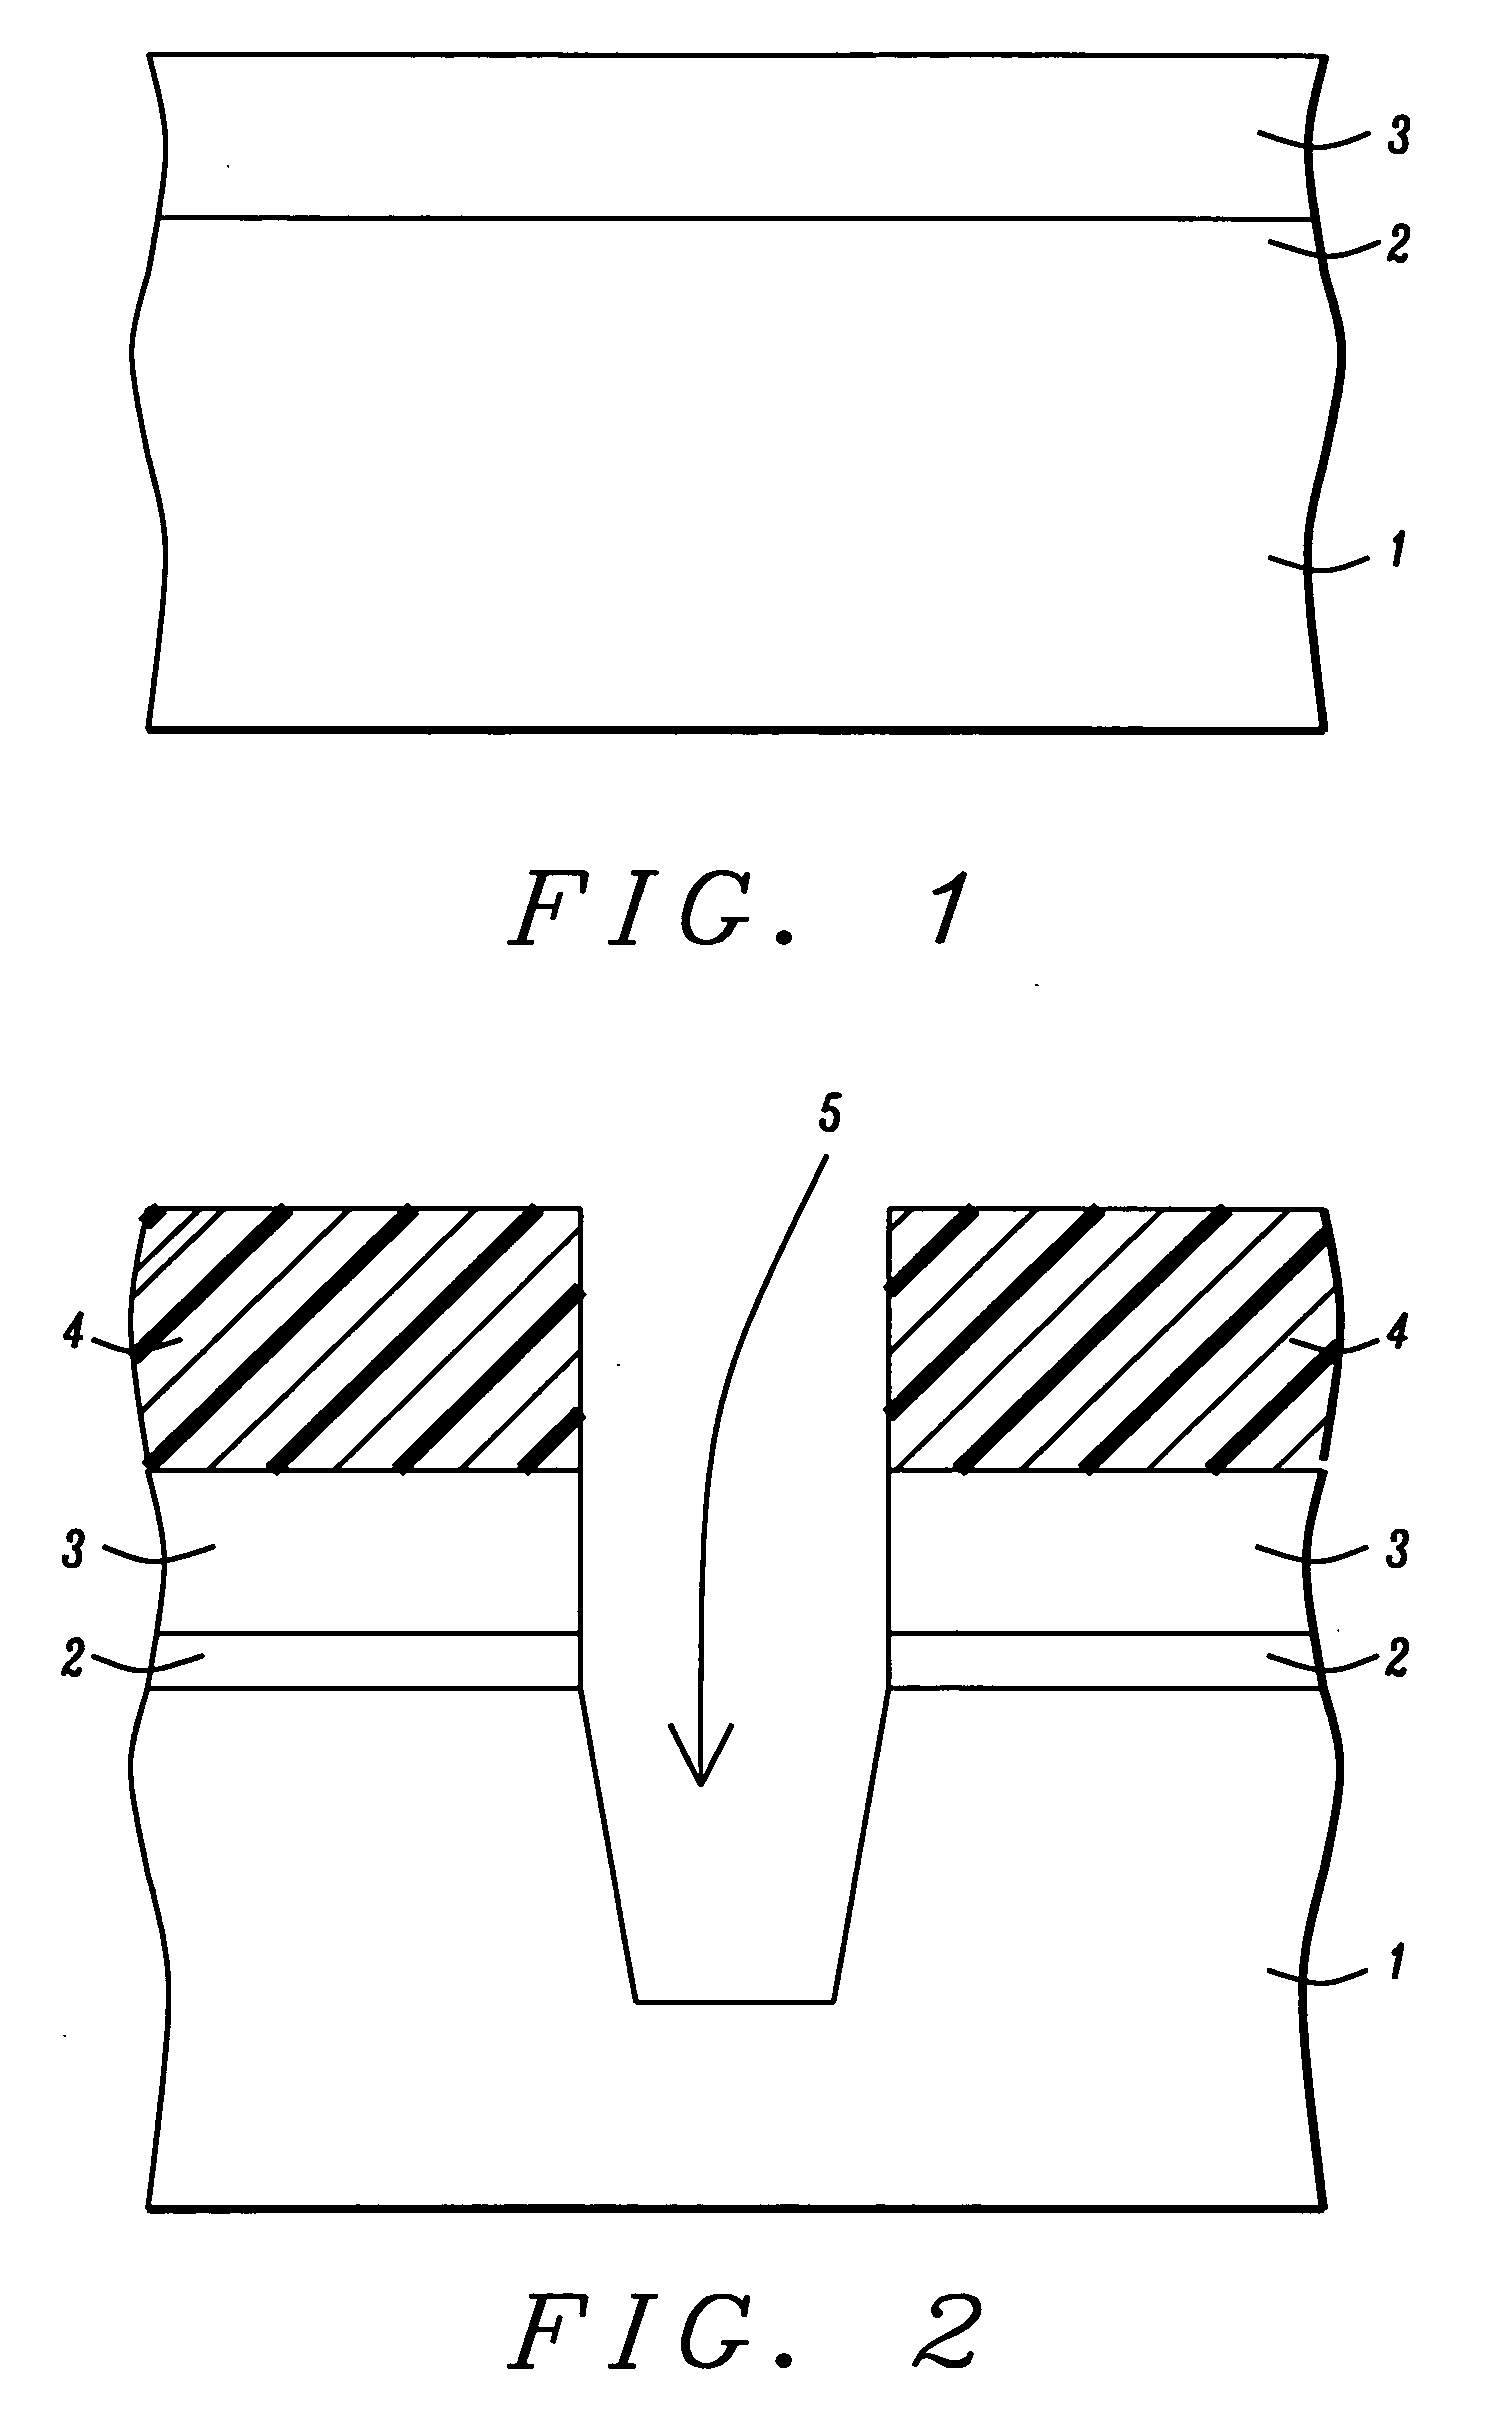 Method to improve device isolation via fabrication of deeper shallow trench isolation regions